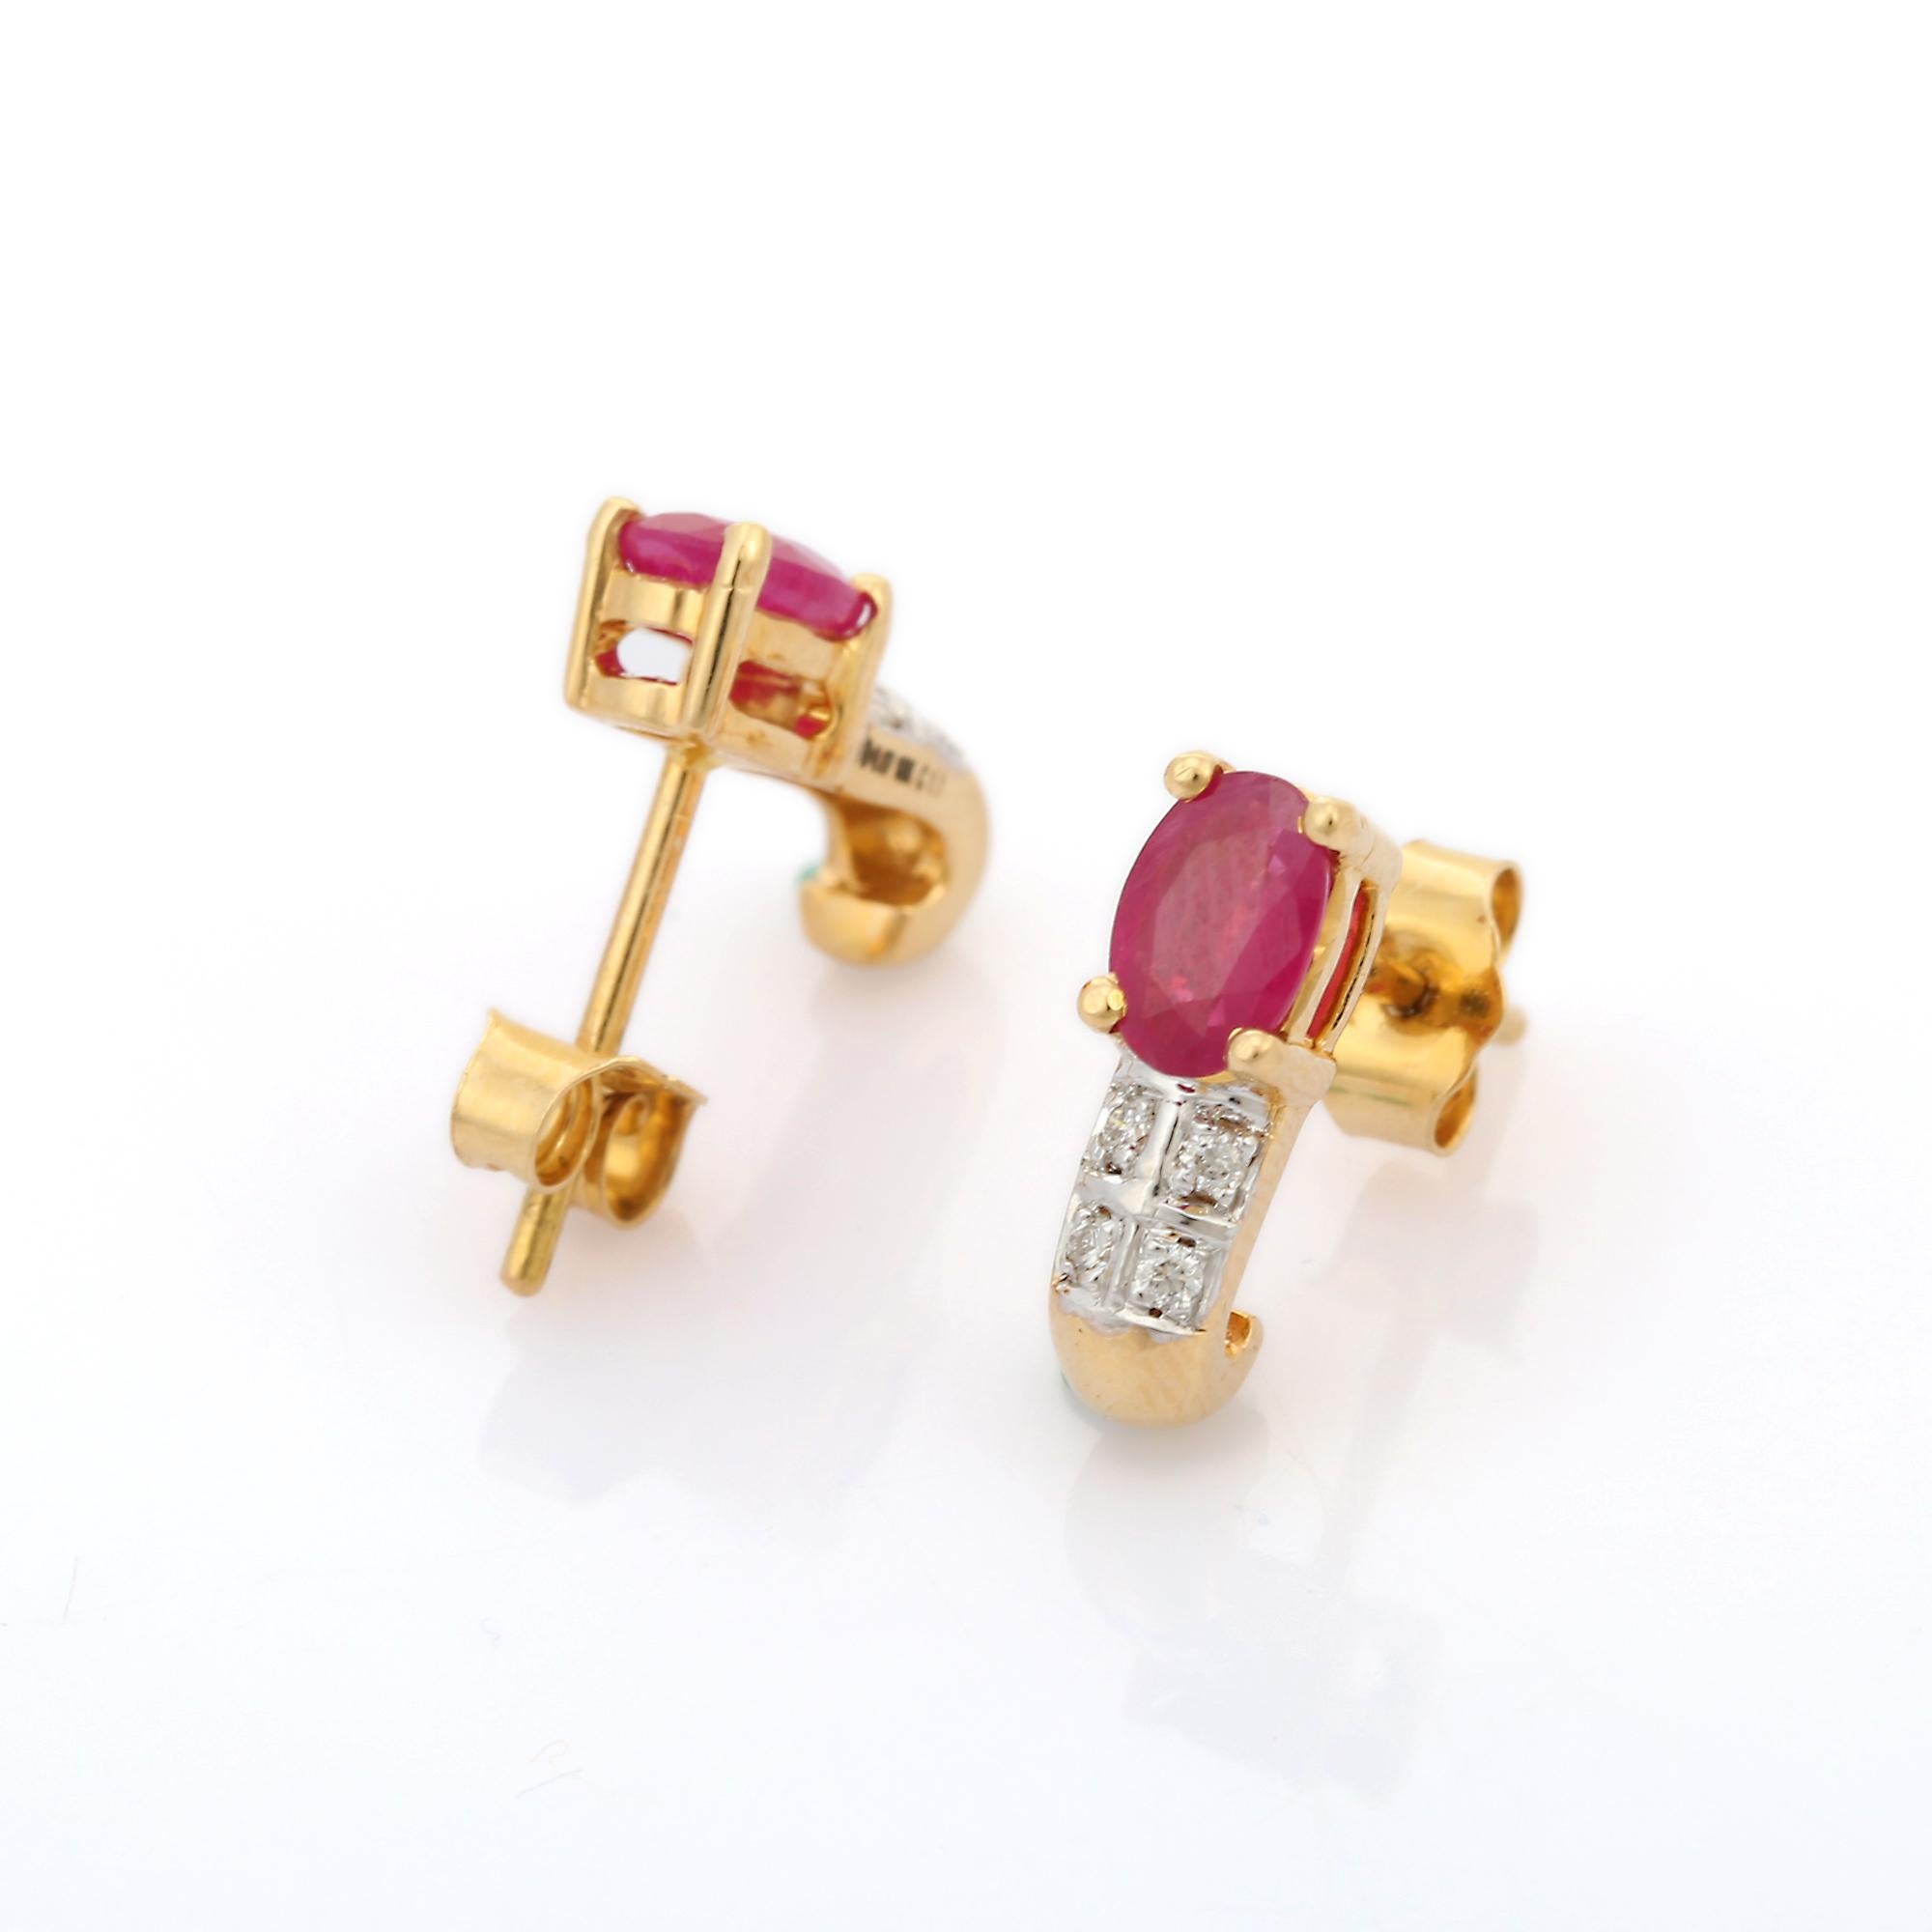 Studs create a subtle beauty while showcasing the colors of the natural precious gemstones and illuminating diamonds making a statement.
Ruby Earrings with Diamonds in 18K gold. Embrace your look with these stunning pair of earrings suitable for any